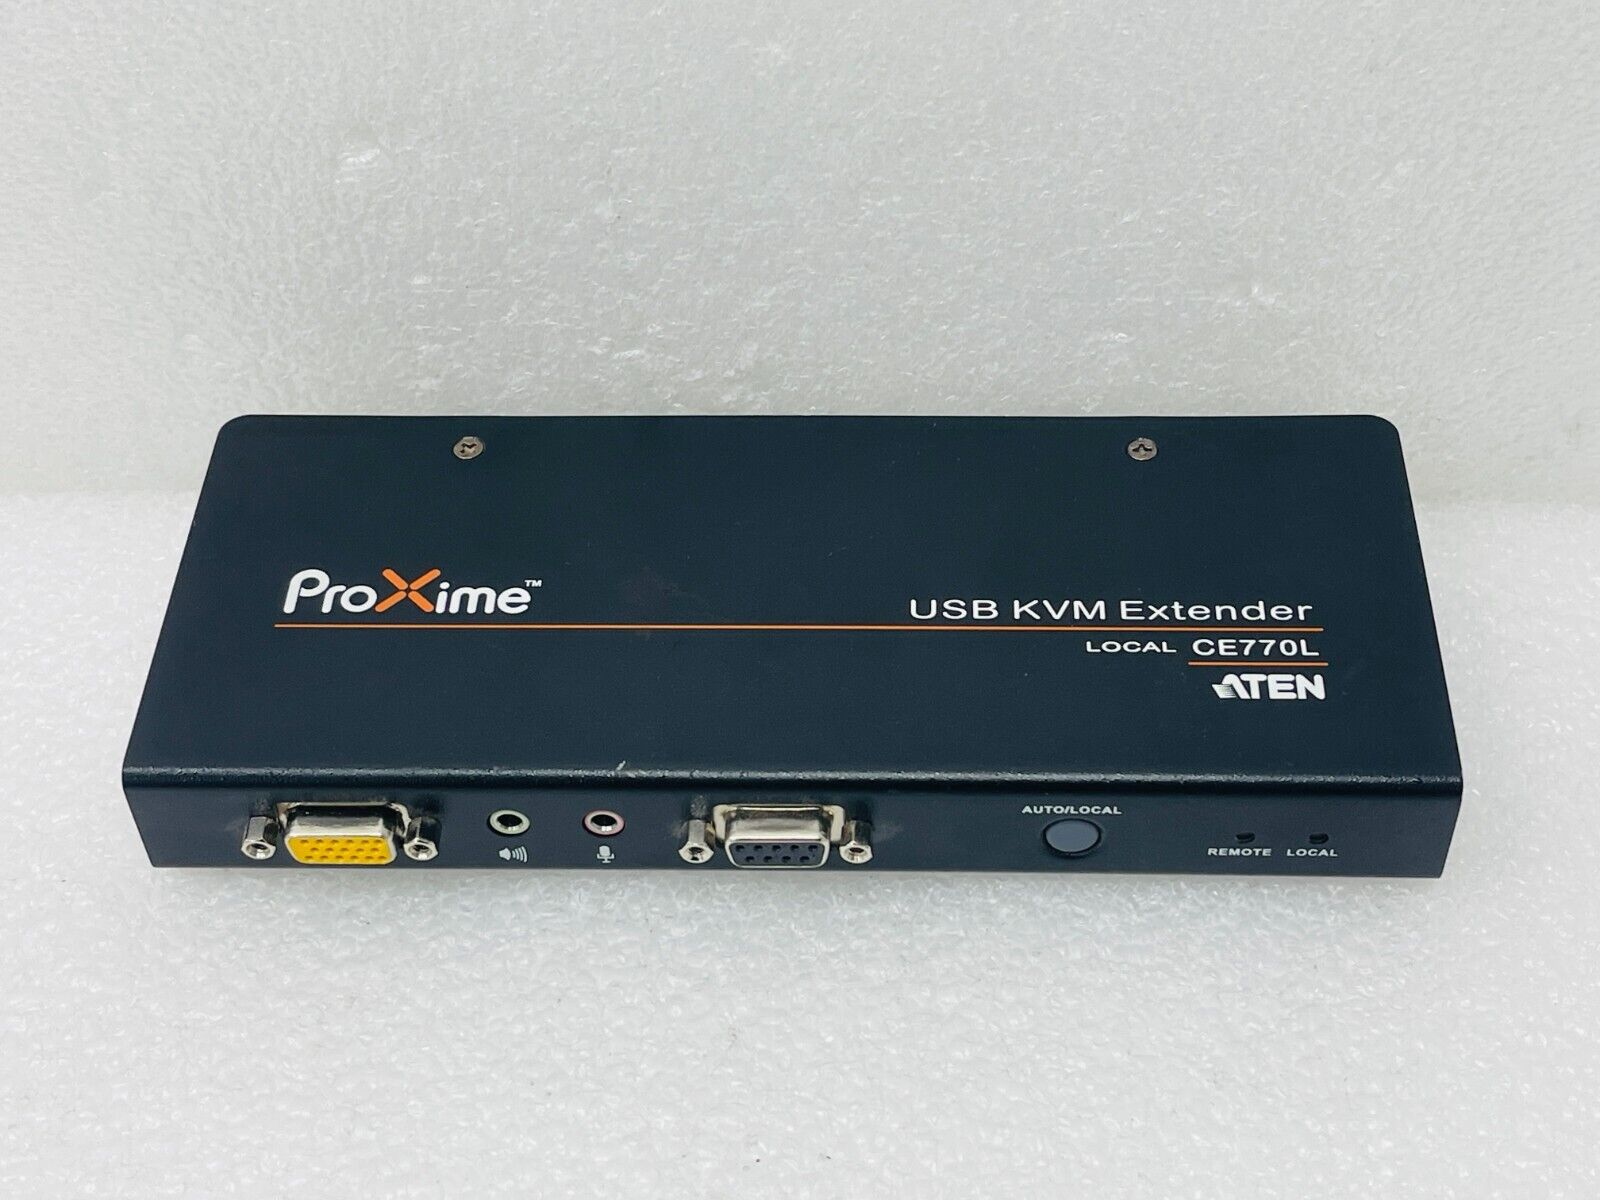 ATEN PROXIME USB KVM EXTENDER LOCAL CE770L / No Power Adapter - Used - 